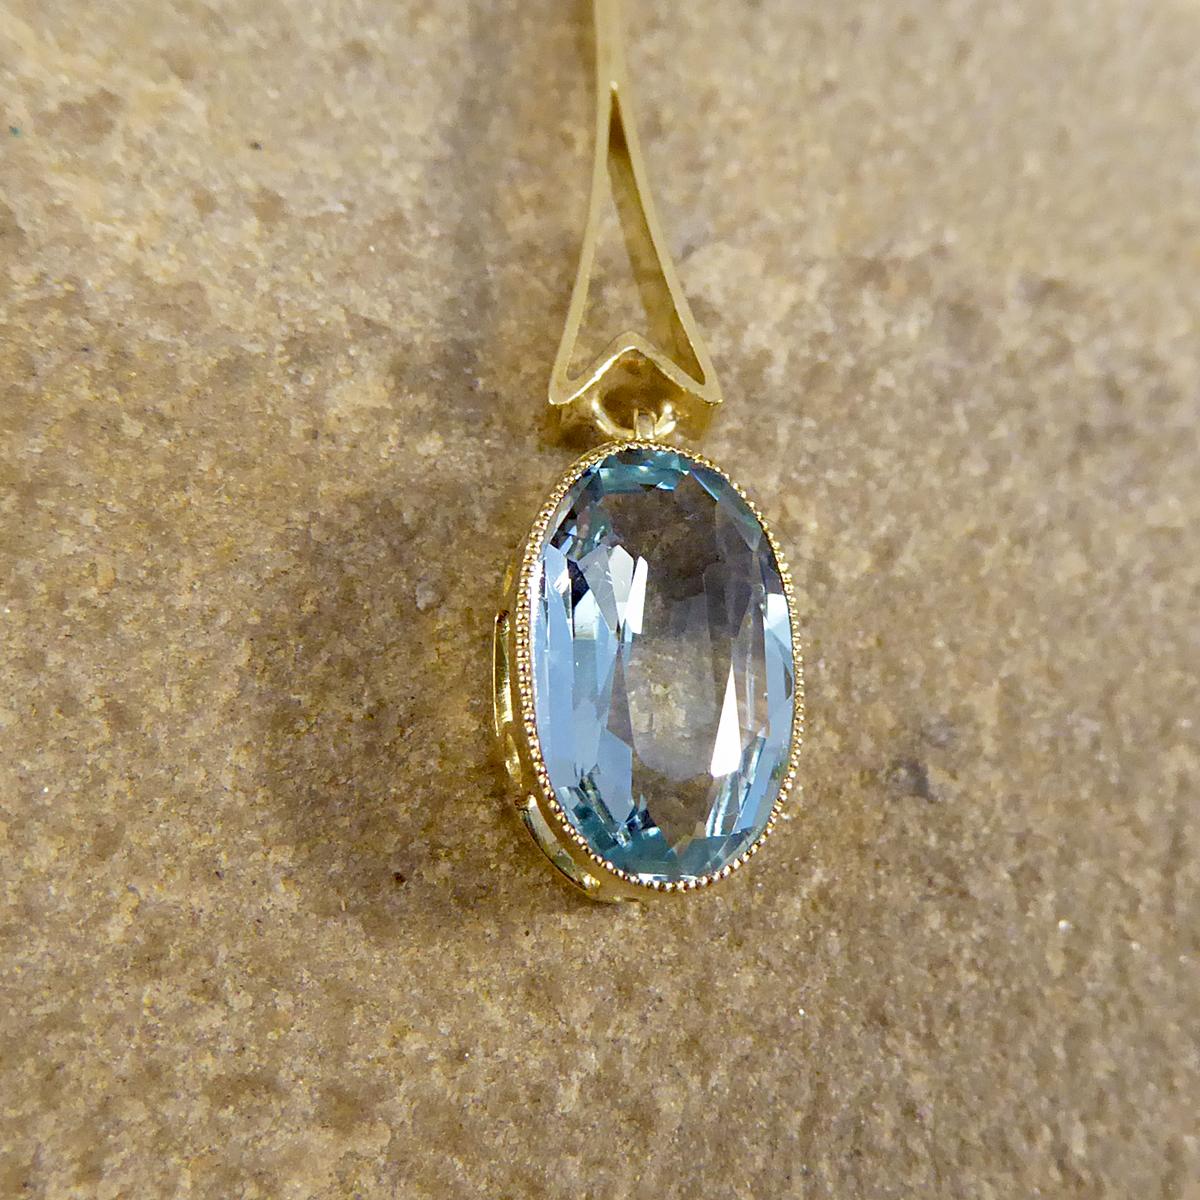 This gorgeous little necklace has been hand crafted in the Edwardian era with love and quality. Sitting on an attached 15ct Yellow Gold chain is a collar set Round Aquamarine with an Oval Aquamarine drop in a 15ct Yellow Gold setting. The perfect